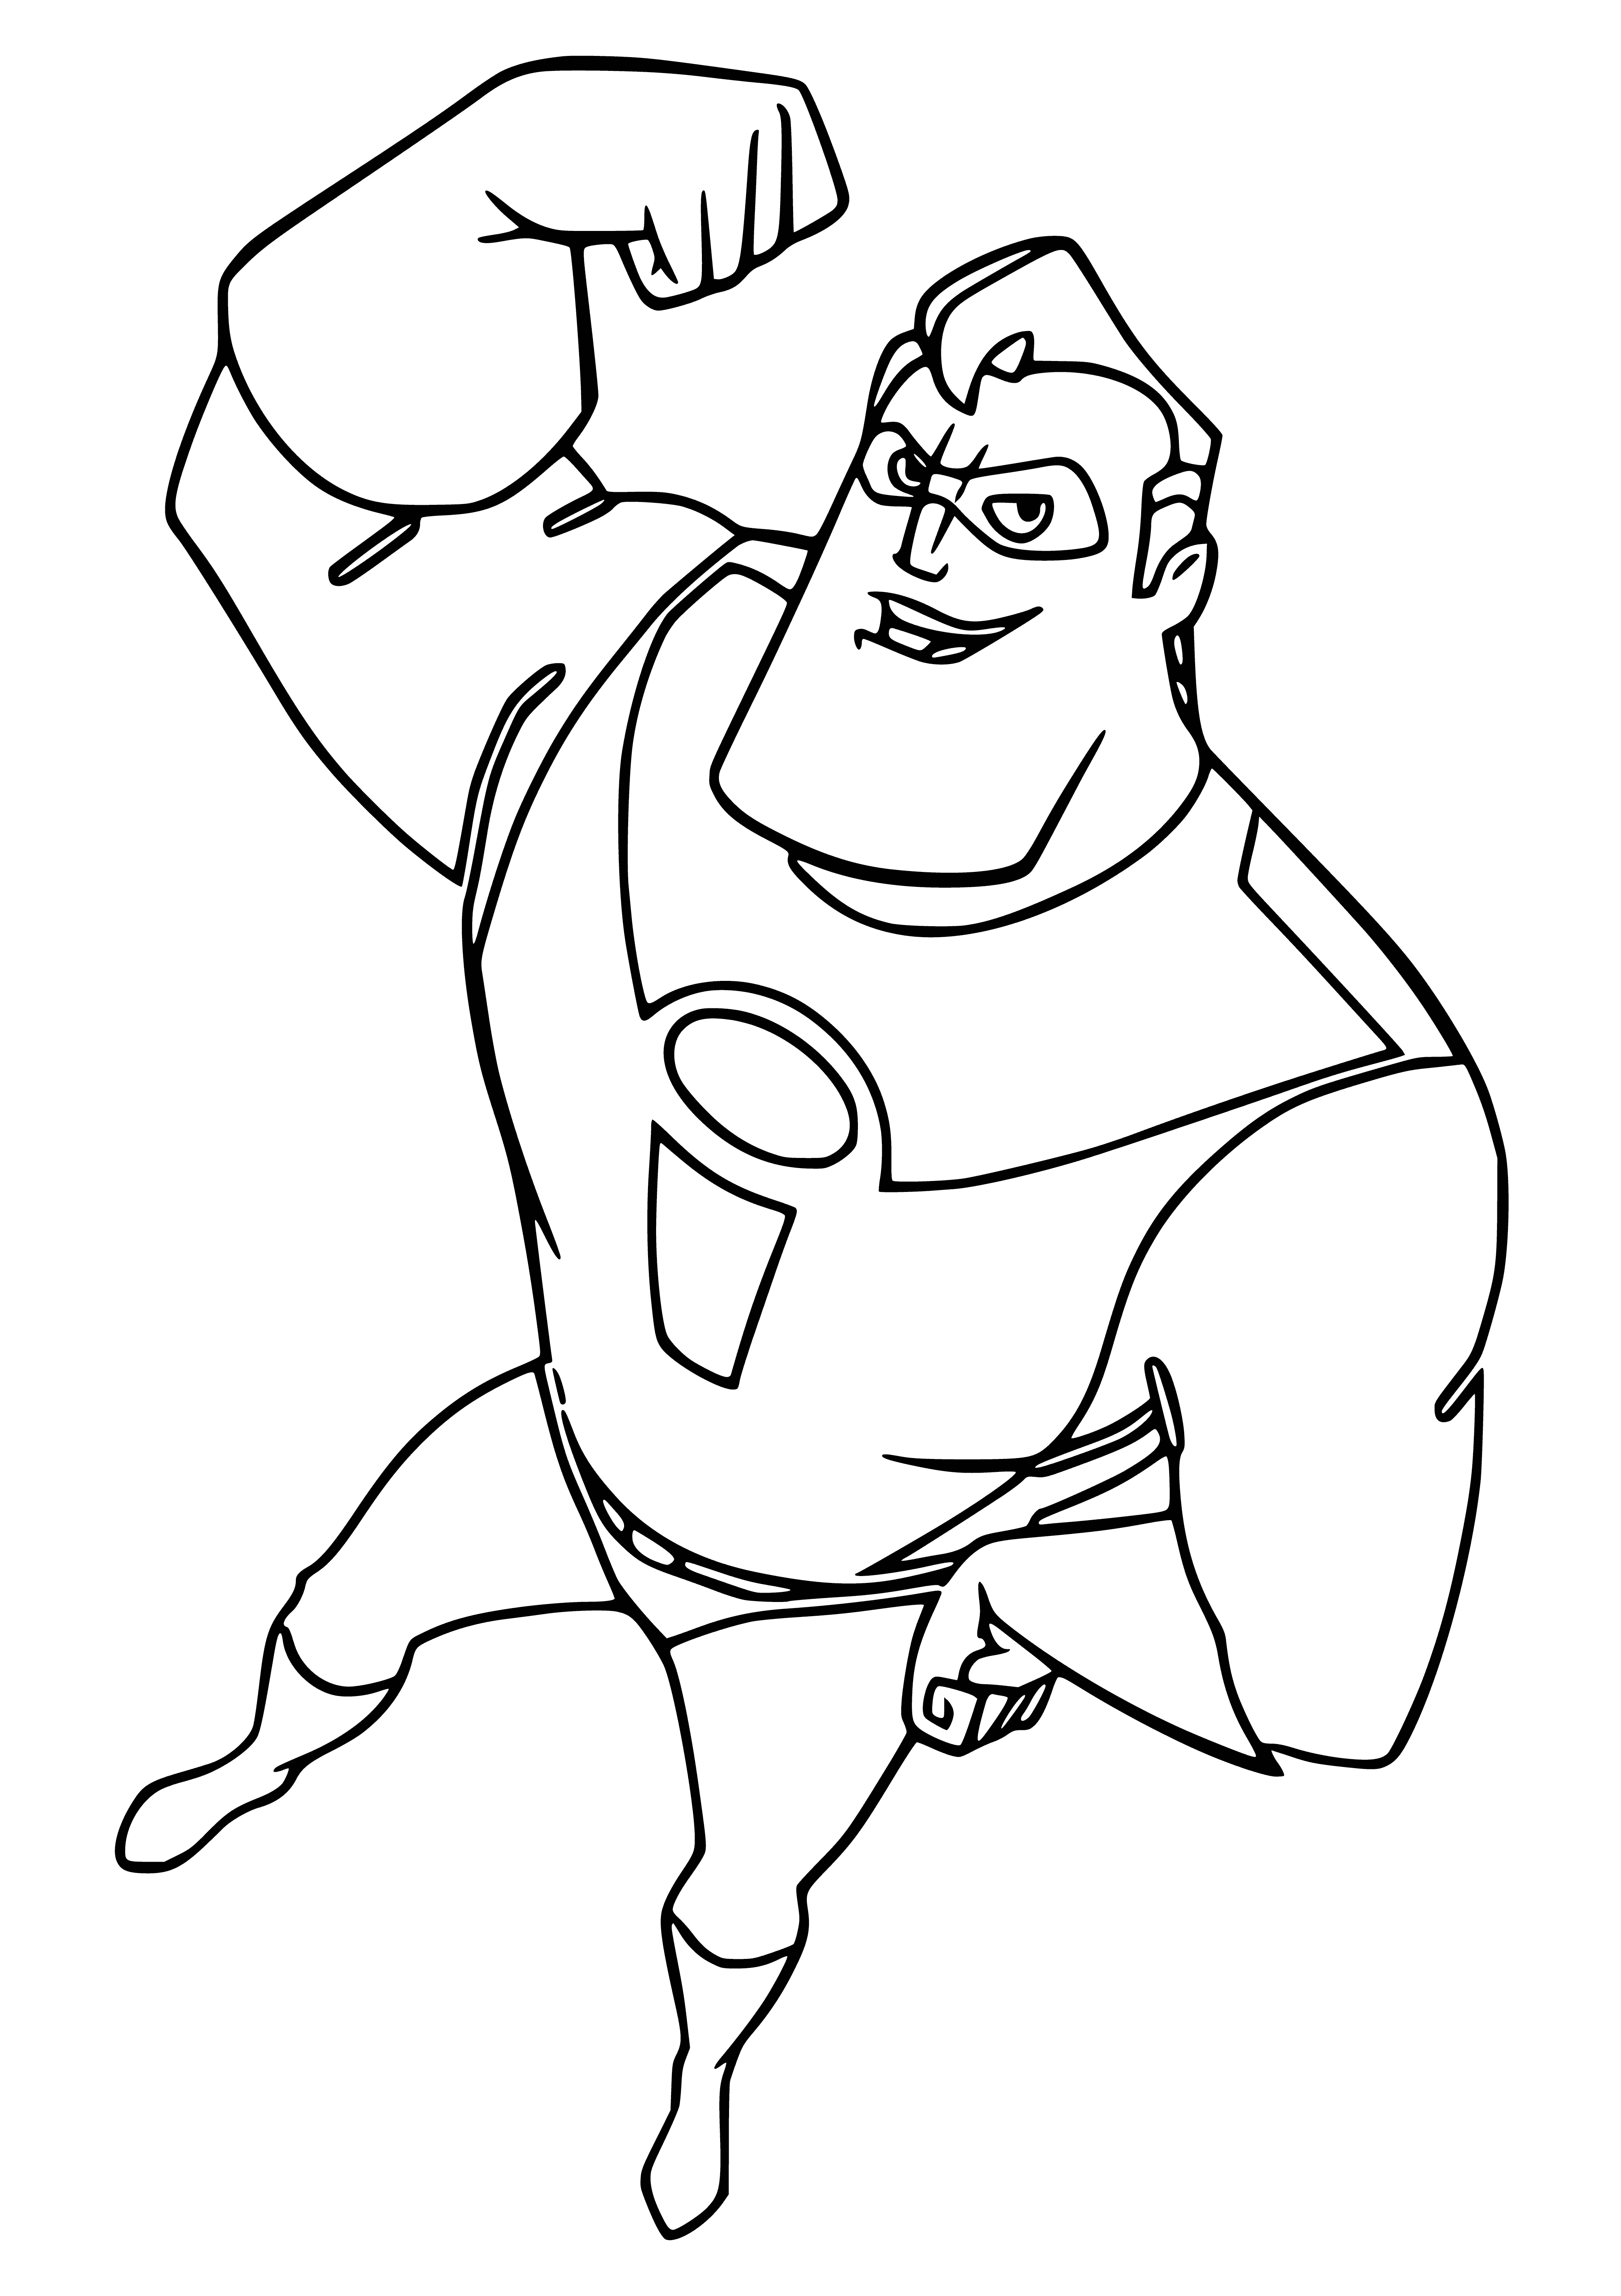 coloring page: Giant man with almond eyes, thick mustache, tan skin in blue suit and red cape holds large red "I".